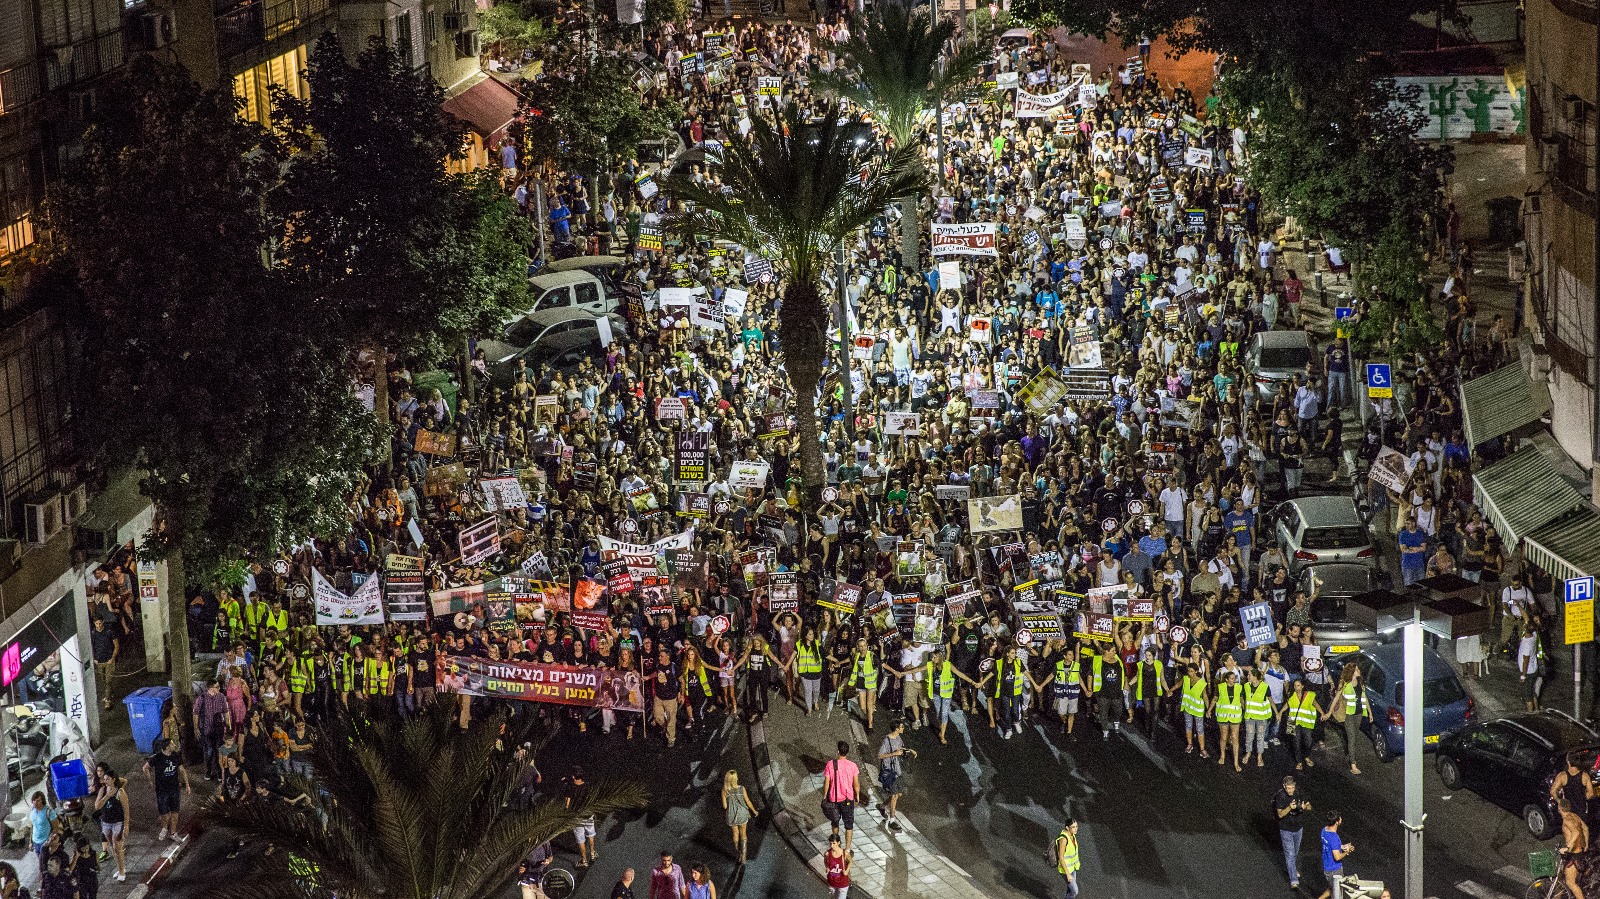 Tel Aviv to host world's largest animal-rights march - ISRAEL21c